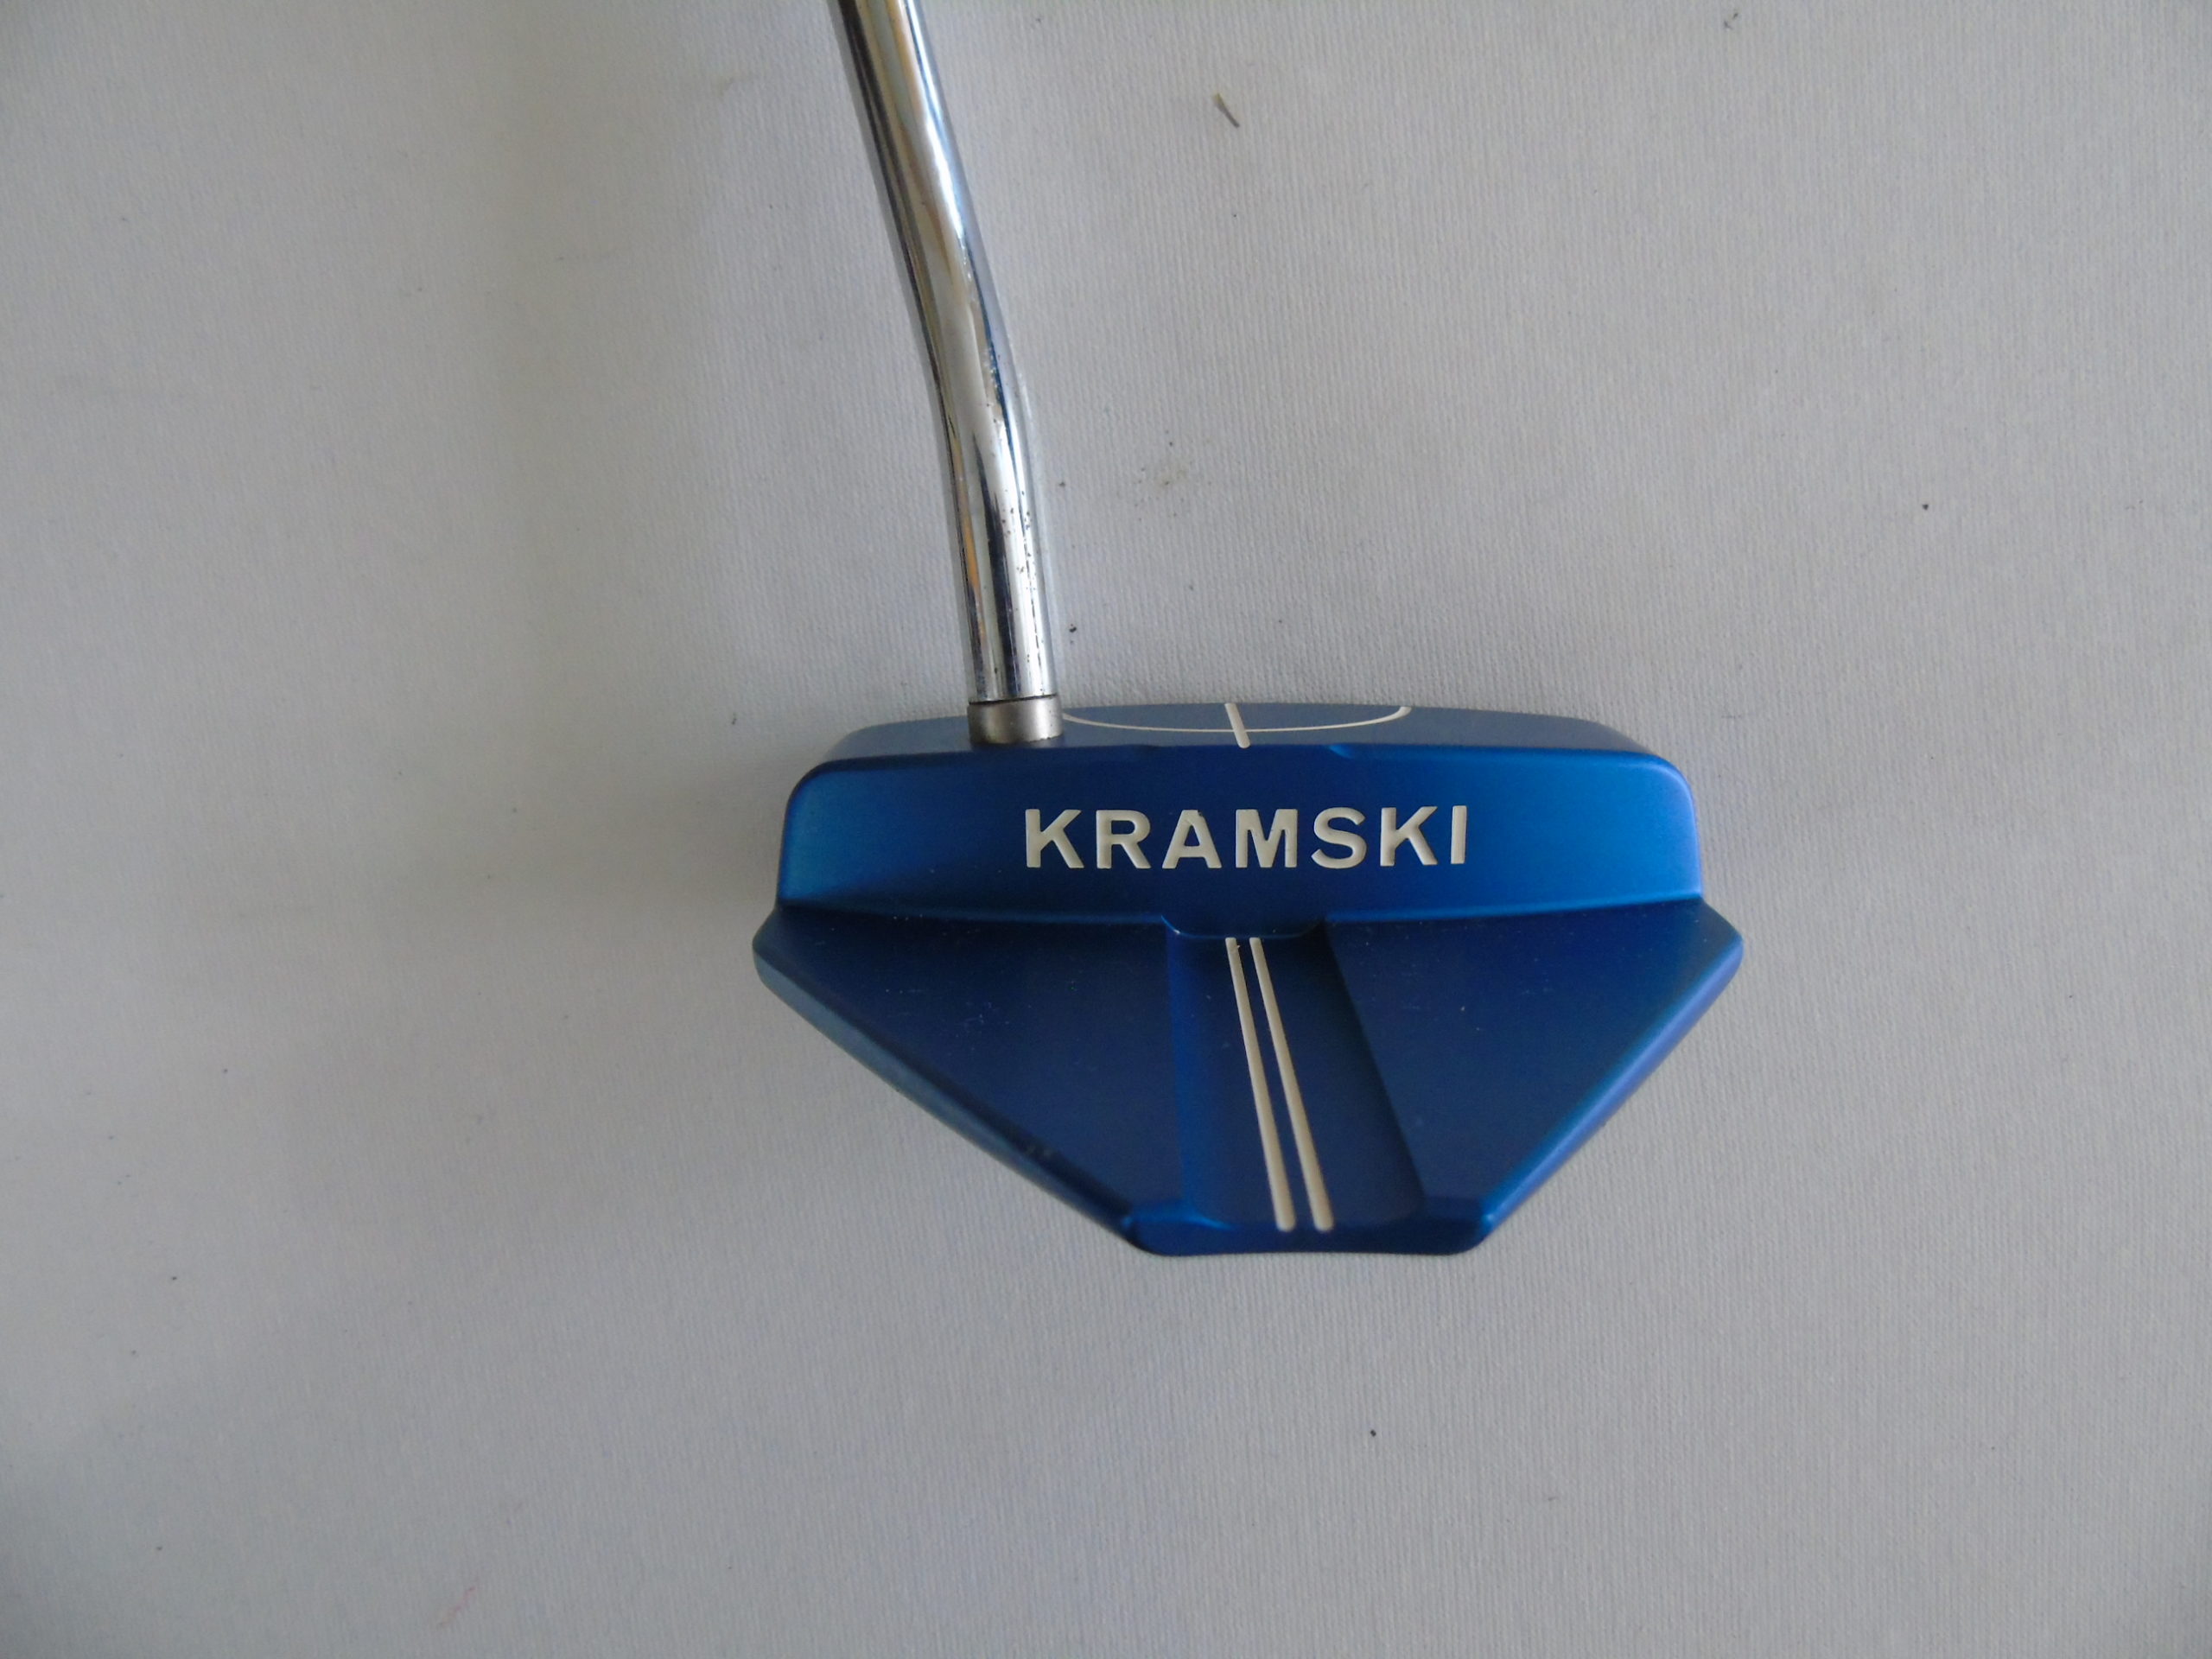 KRAMSKI PUTTER - SOLD New And Used Golf Clubs